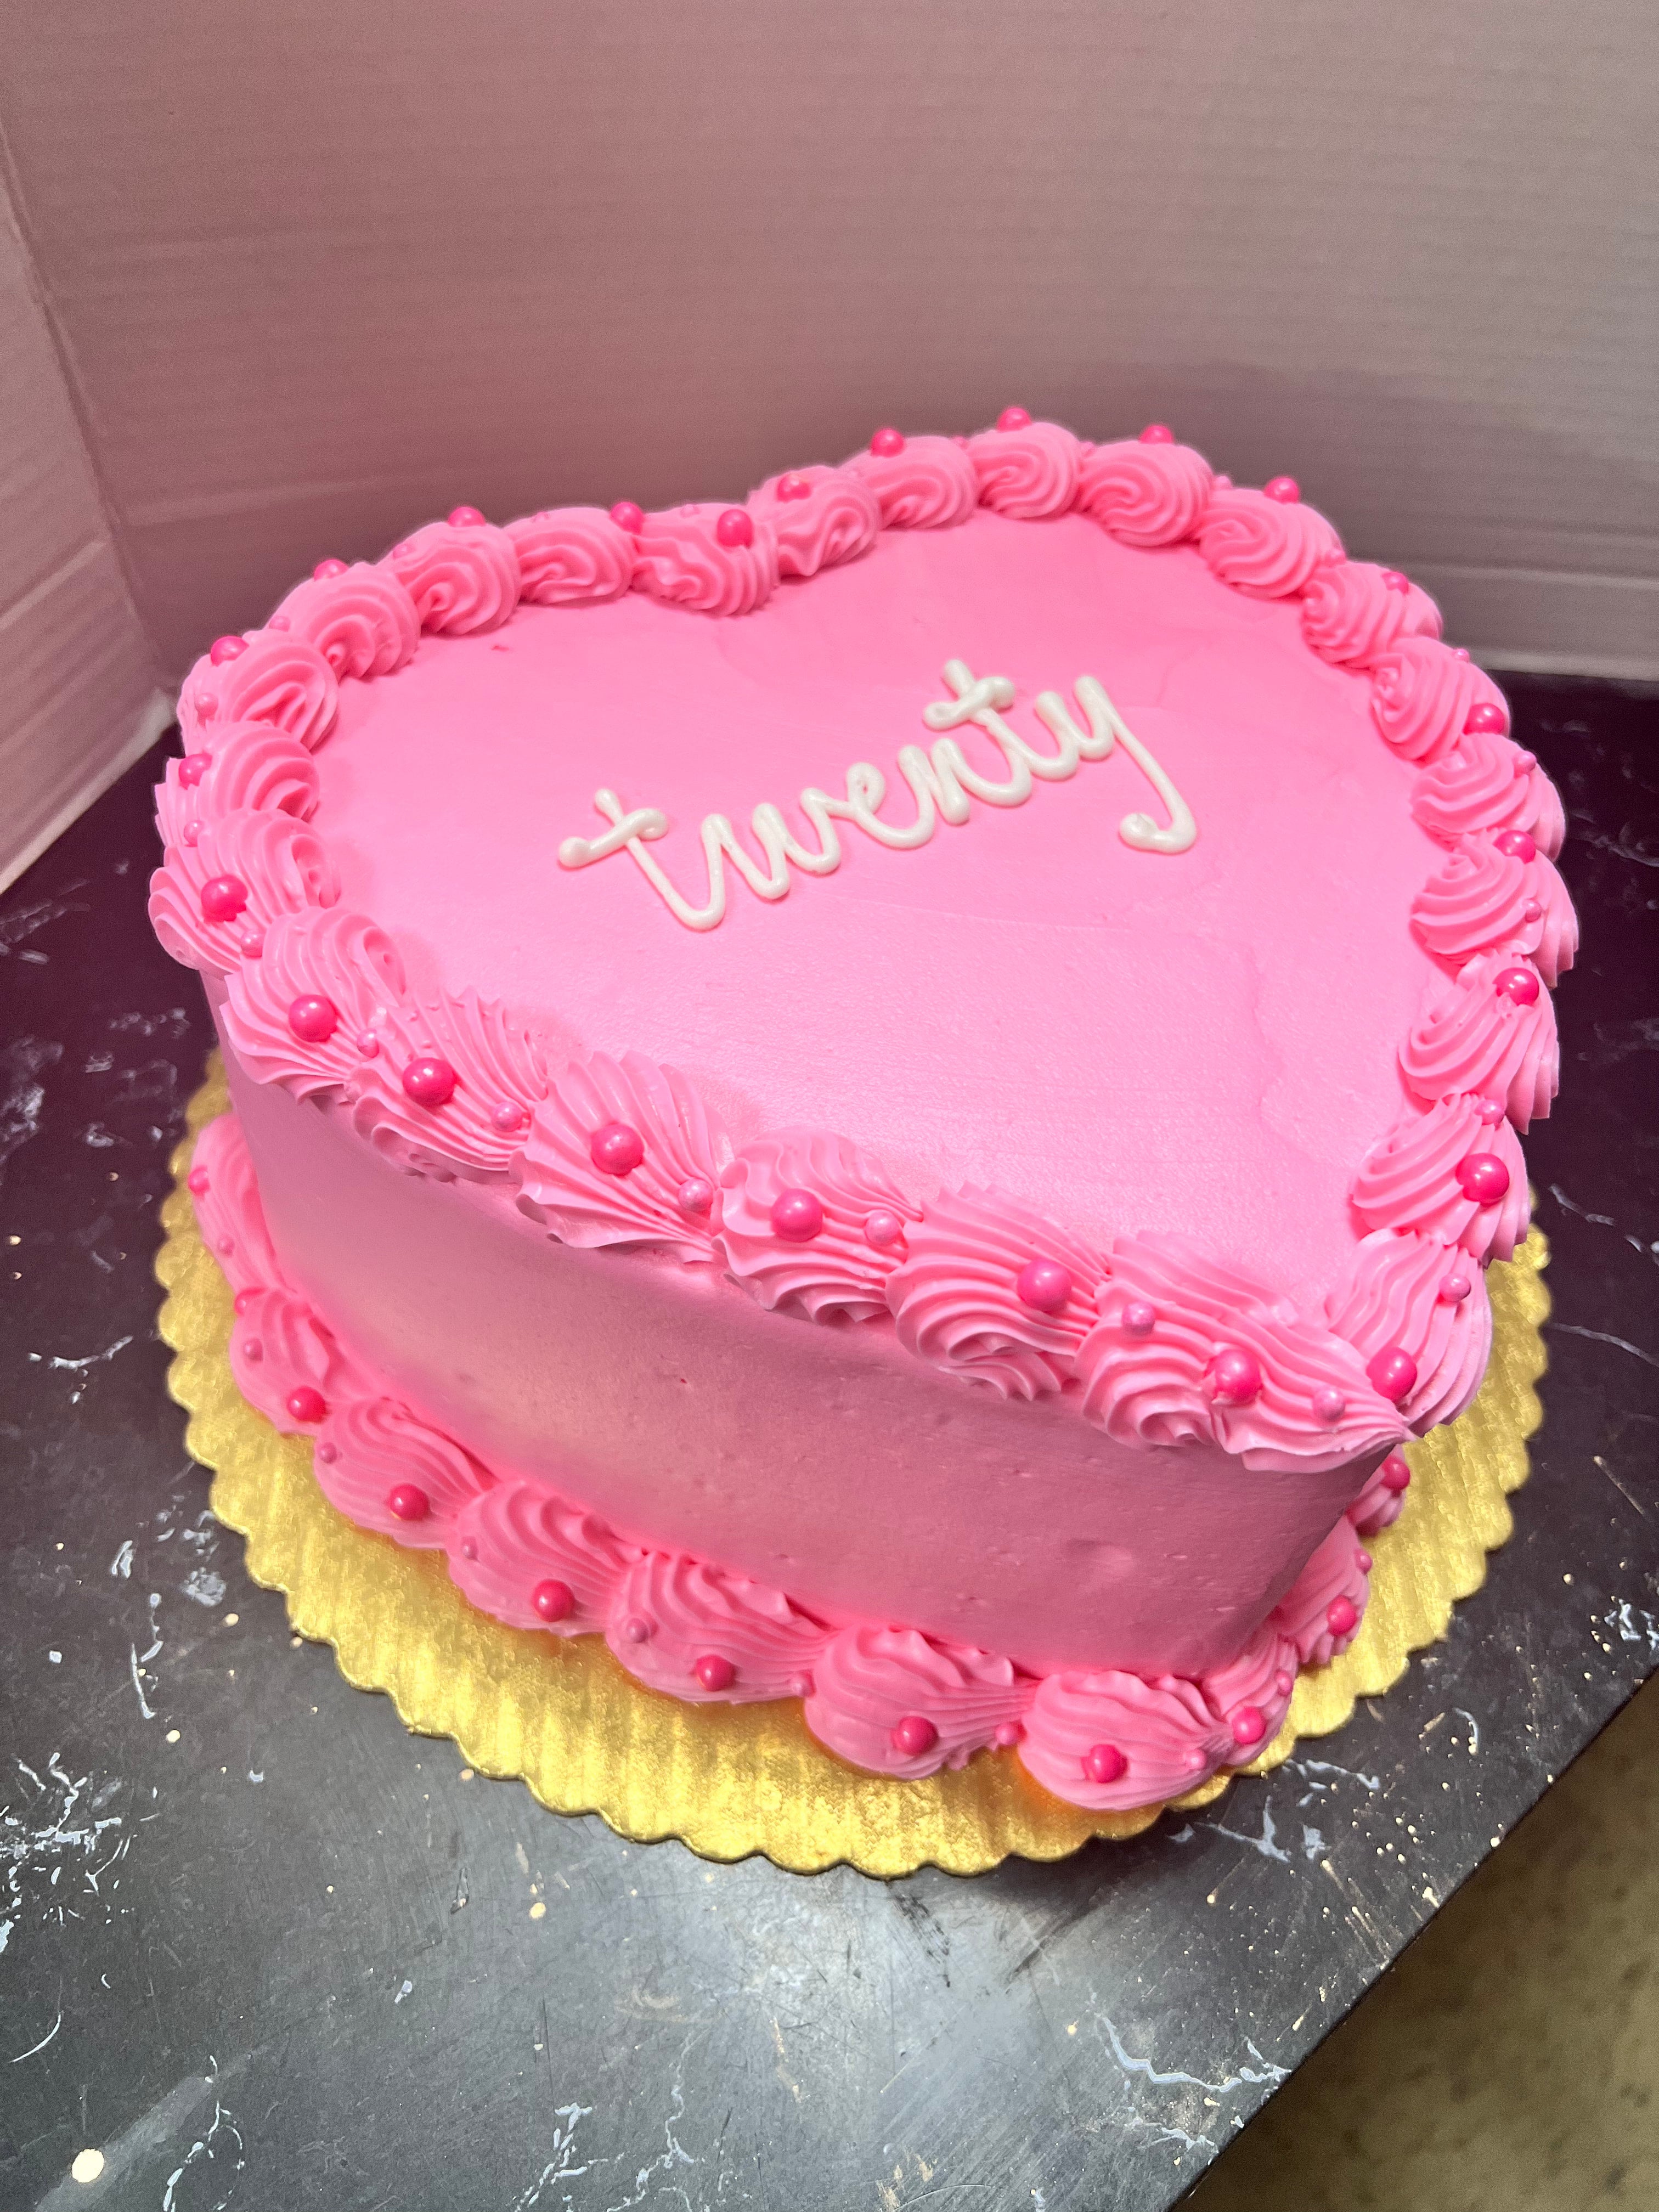 Naked Heart Cake Delivery Los Angeles - Custom Valentine's Day